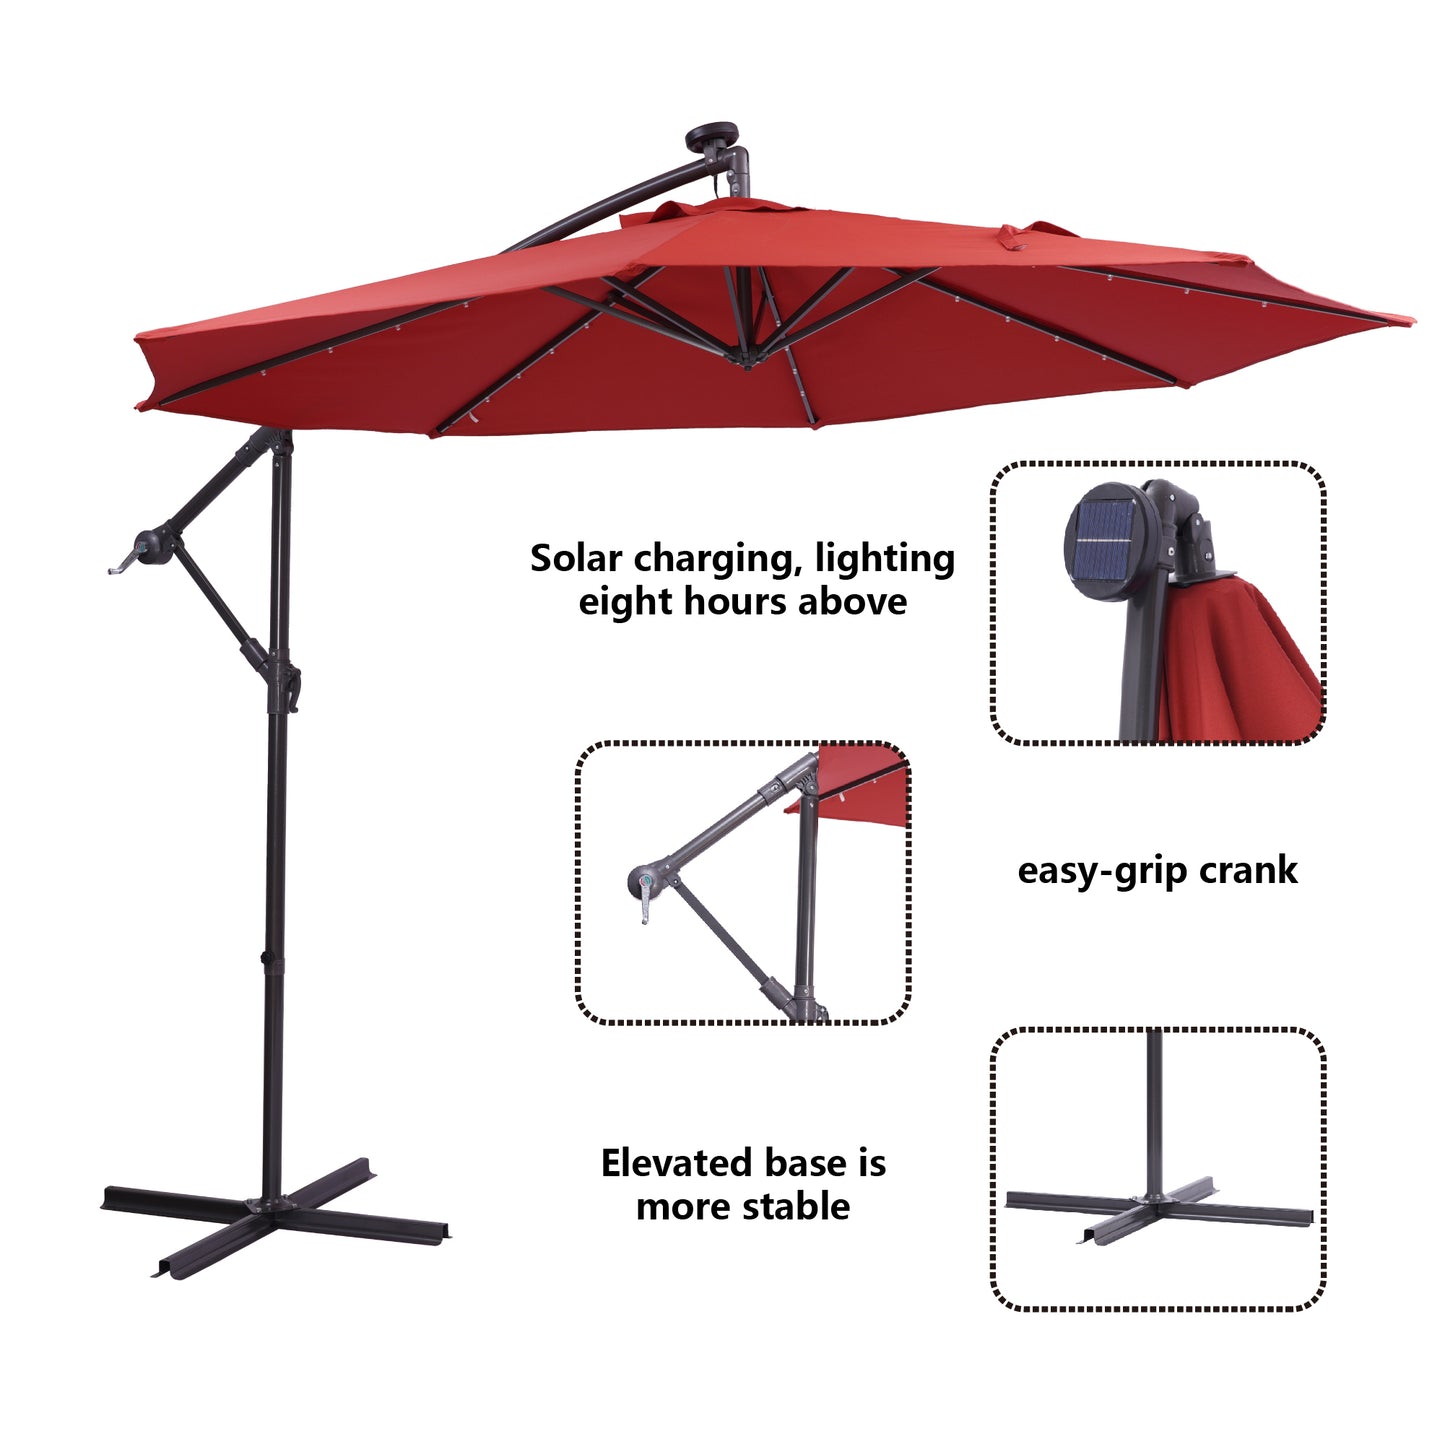 10 FT Solar LED Patio Outdoor Umbrella Hanging Cantilever Umbrella Offset Umbrella Easy Open Adustment with 32 LED Lights